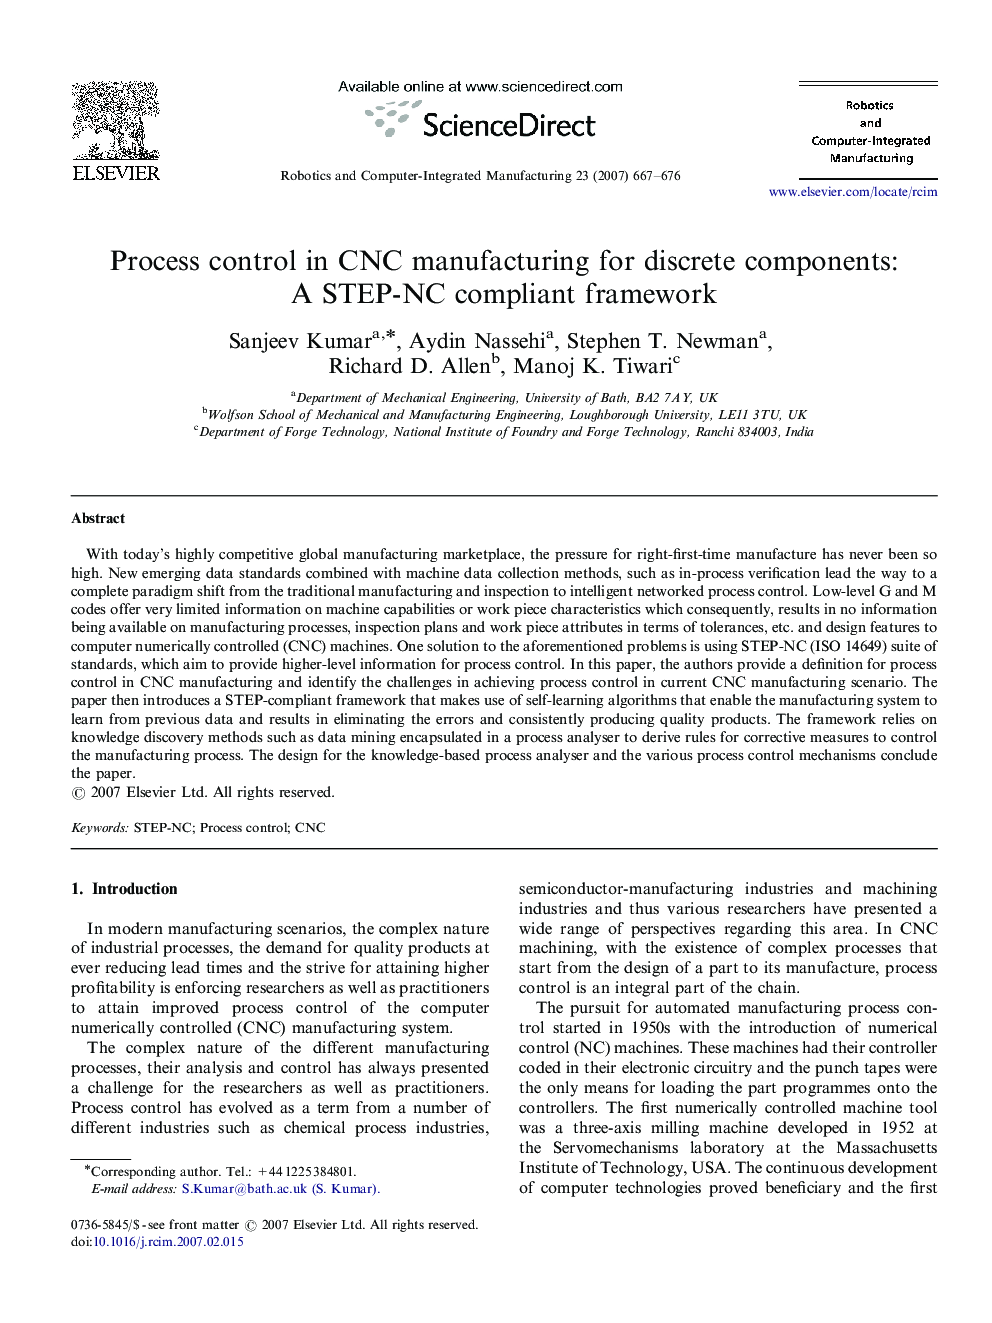 Process control in CNC manufacturing for discrete components: A STEP-NC compliant framework